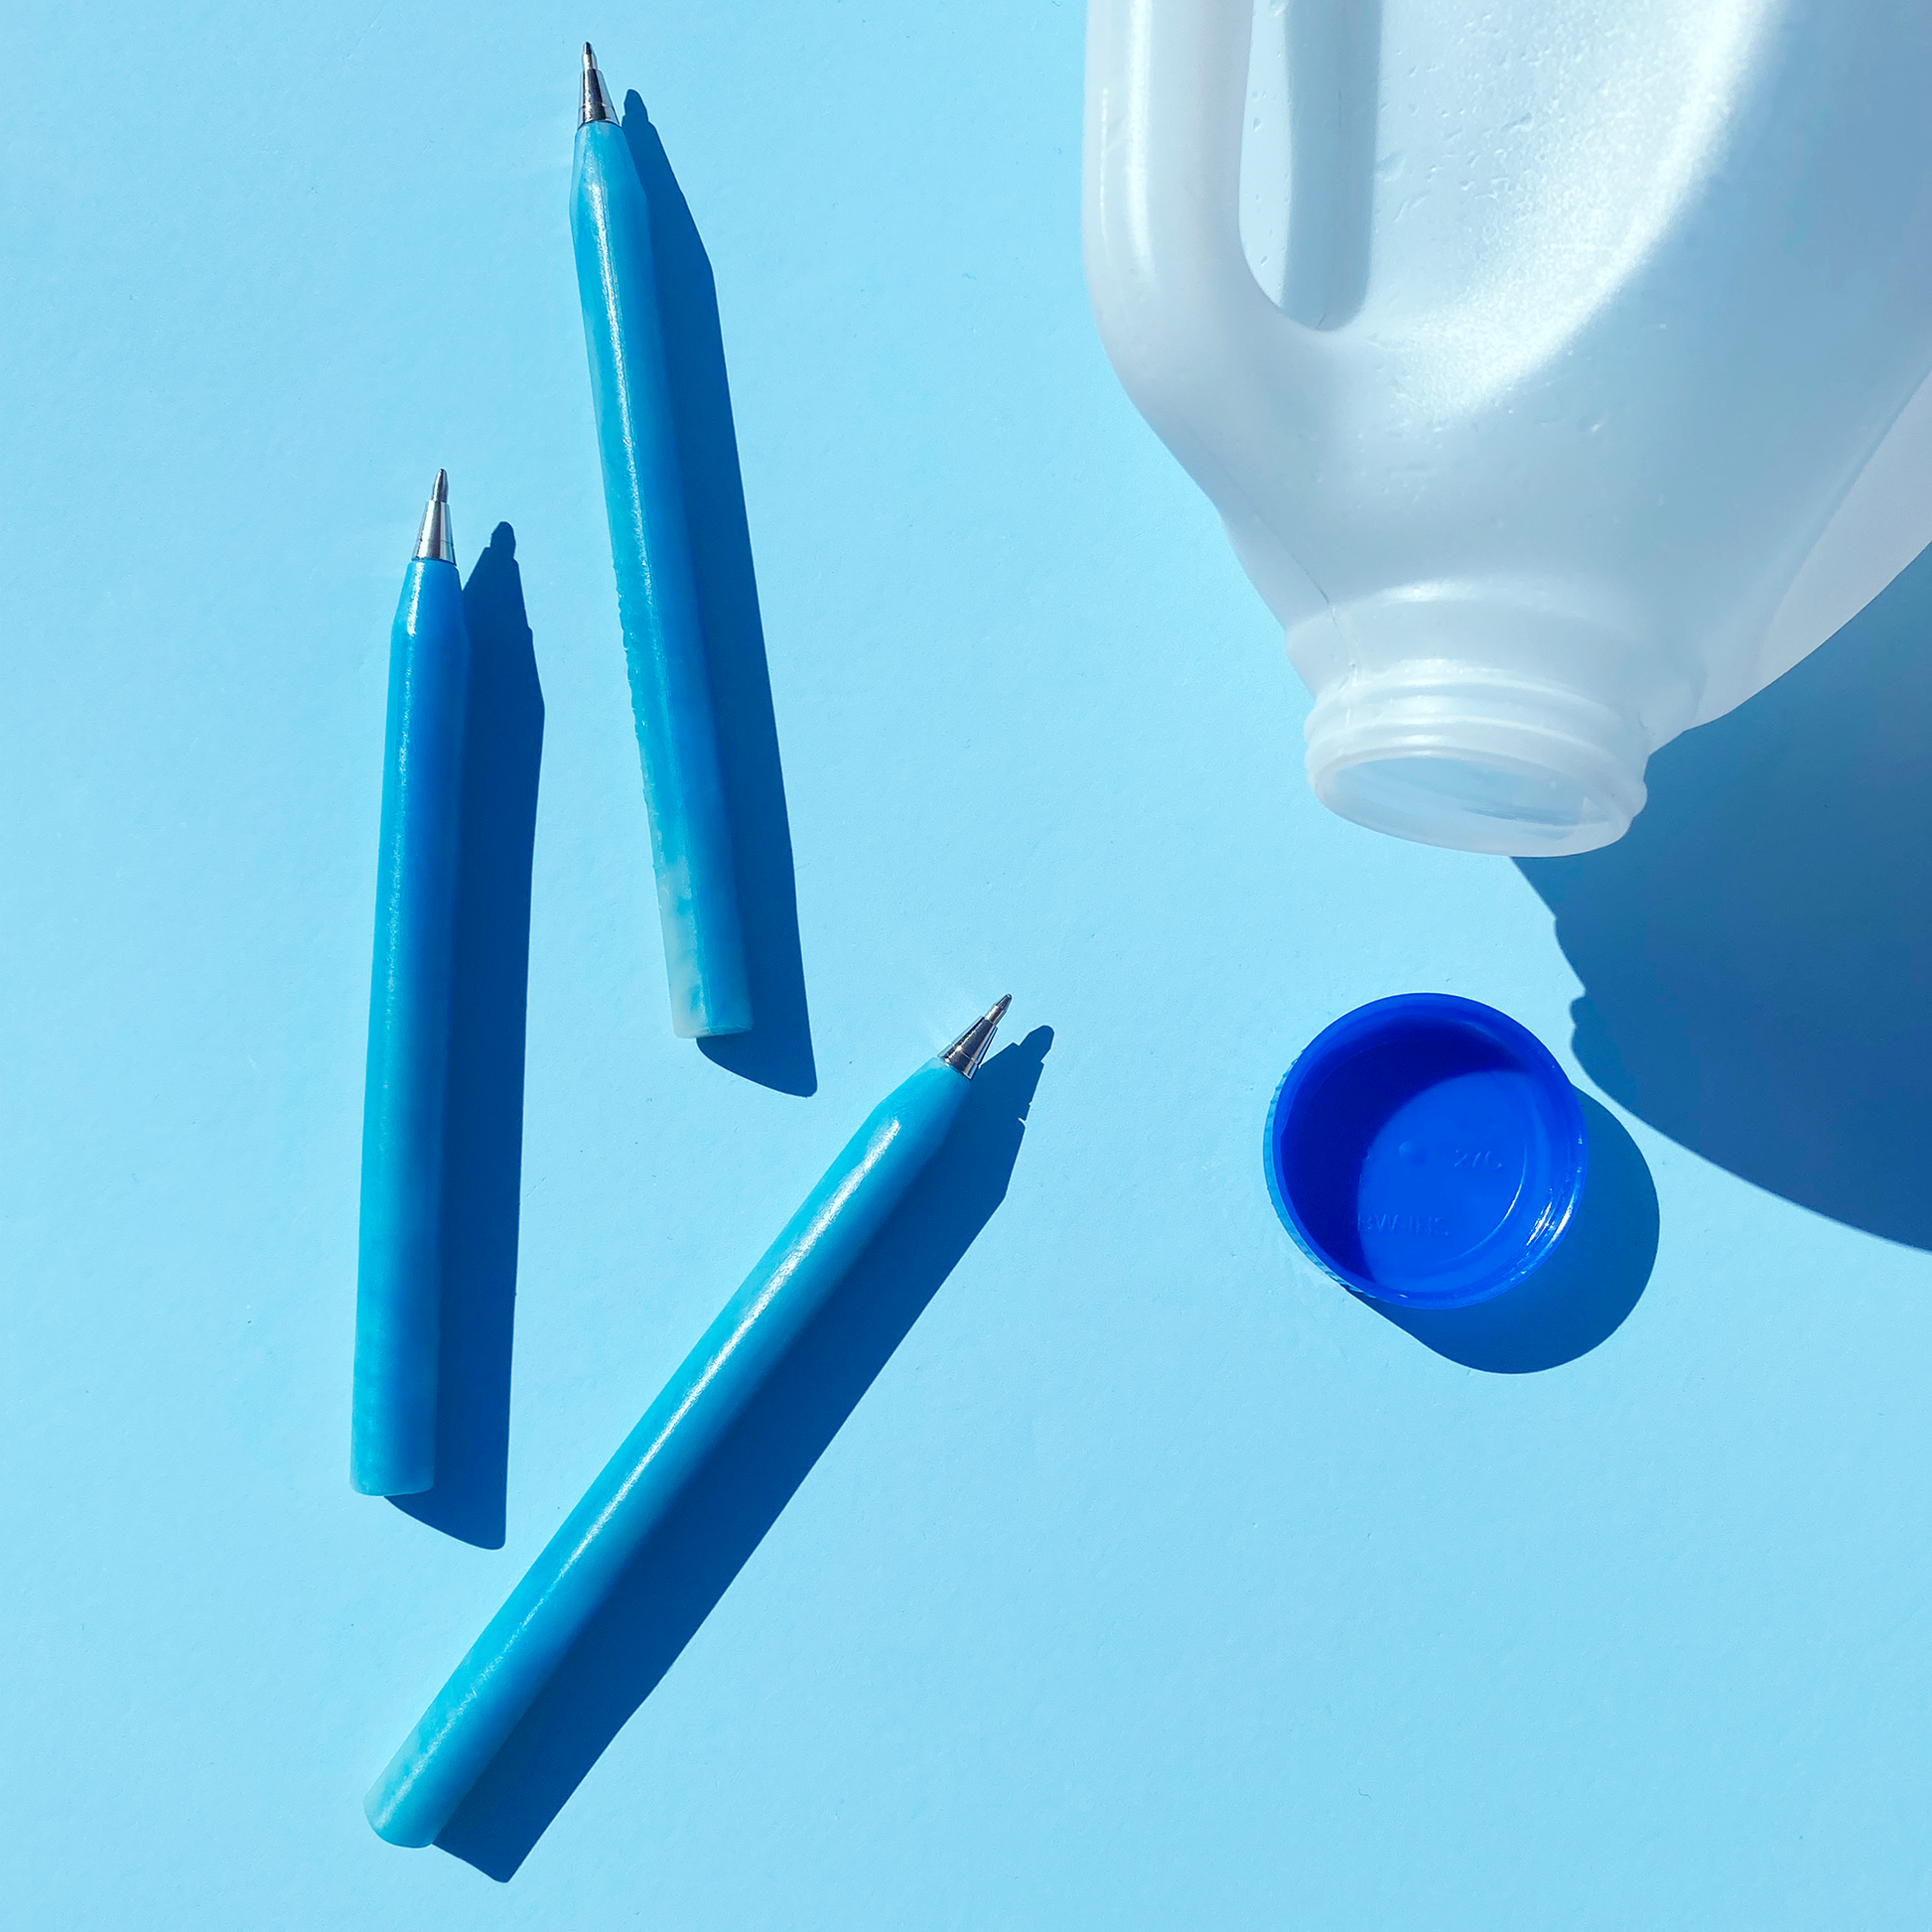 Pens made from milk bottles and plastic waste